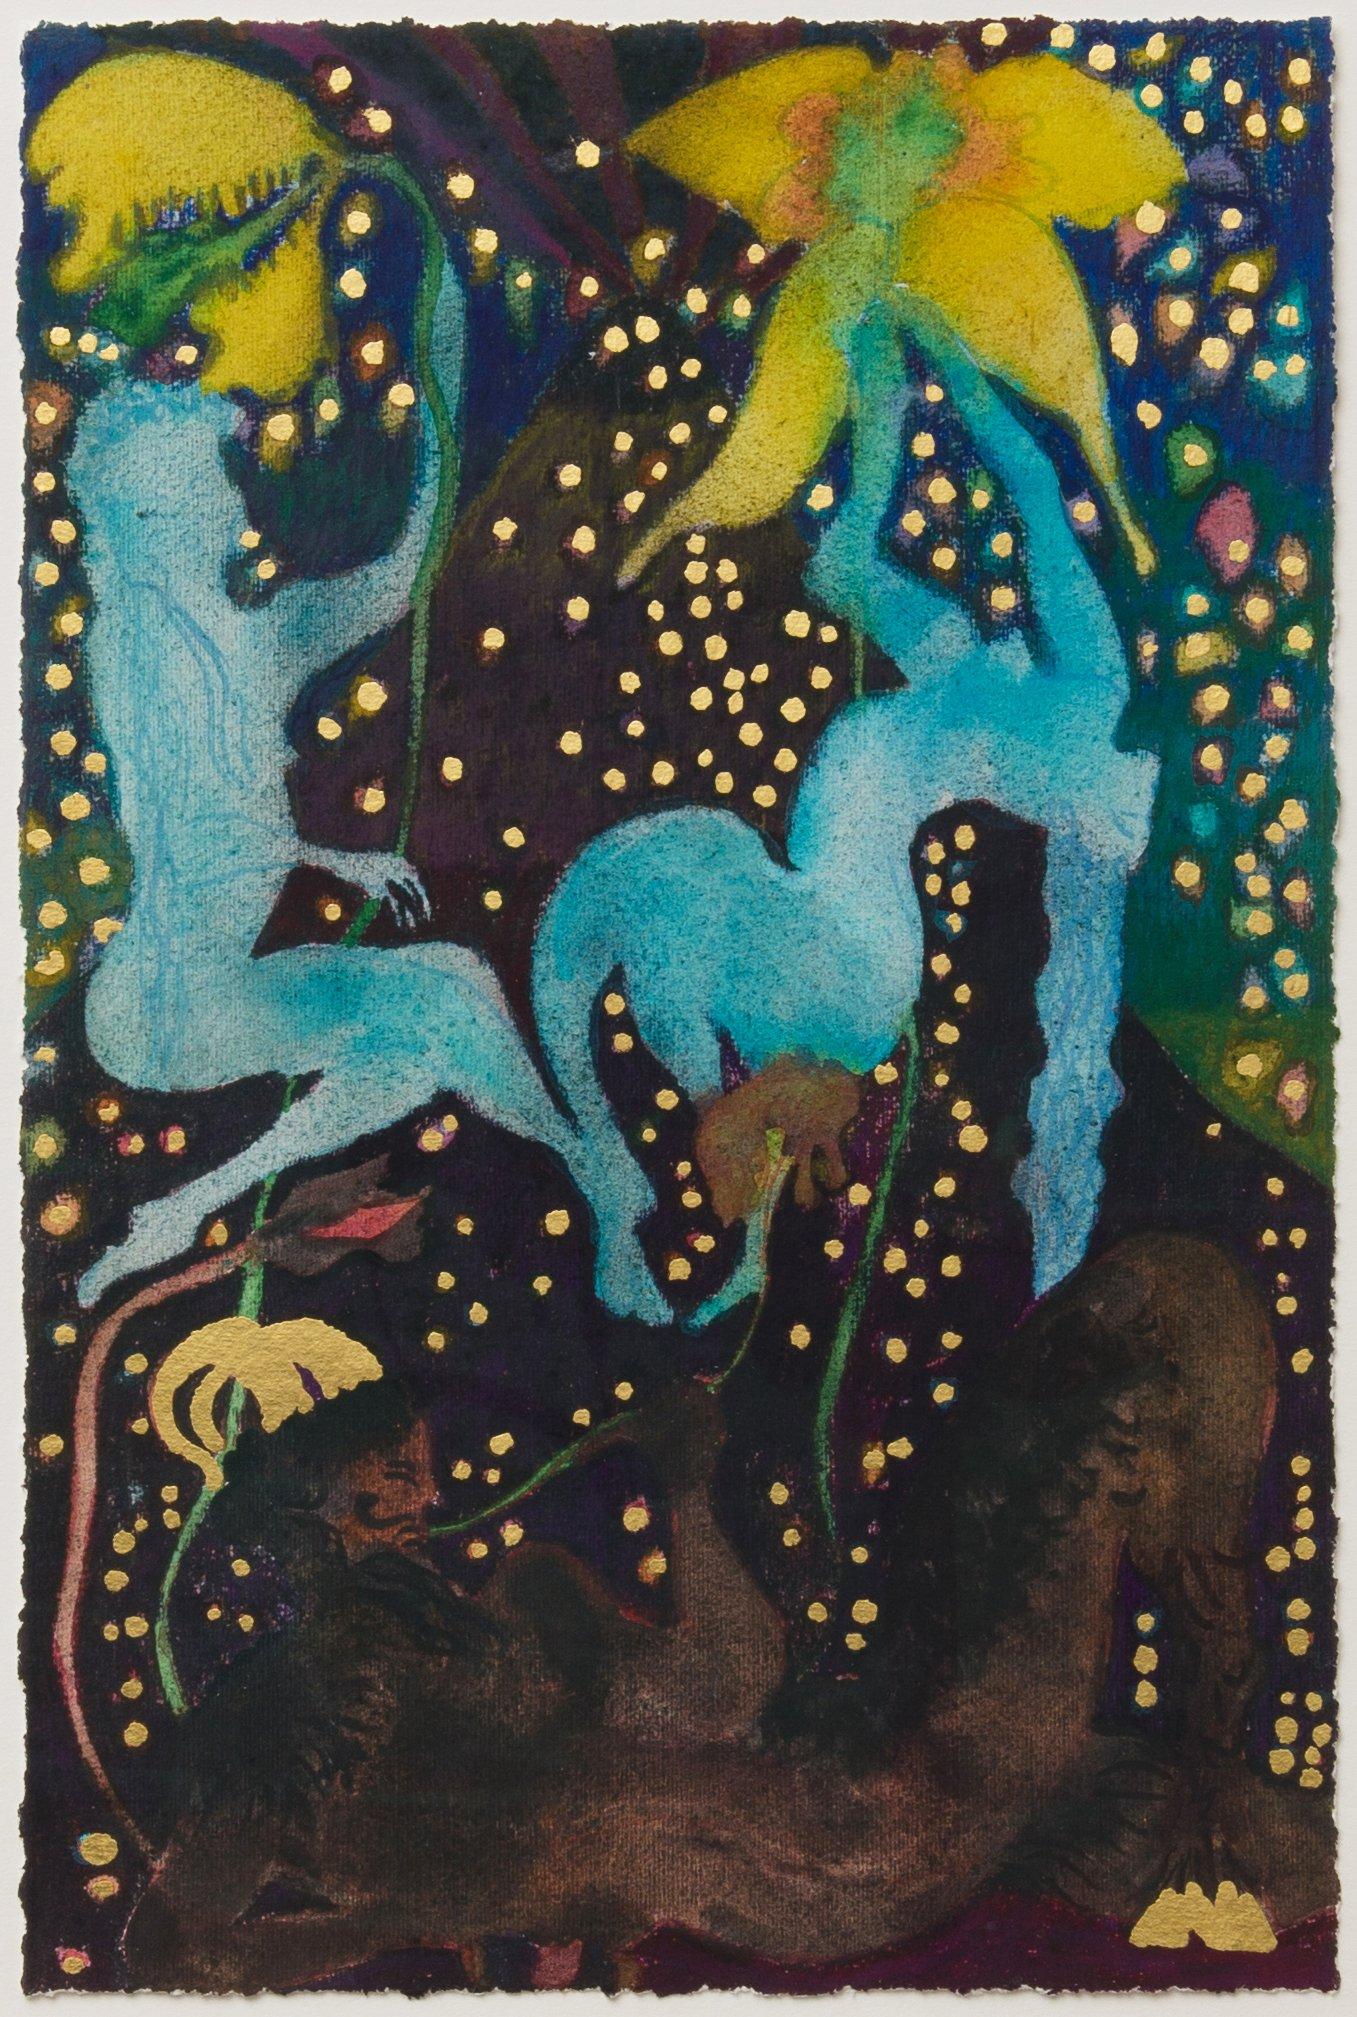 Afternoon with la Soufrière (Prelude 4) - Print by Chris Ofili